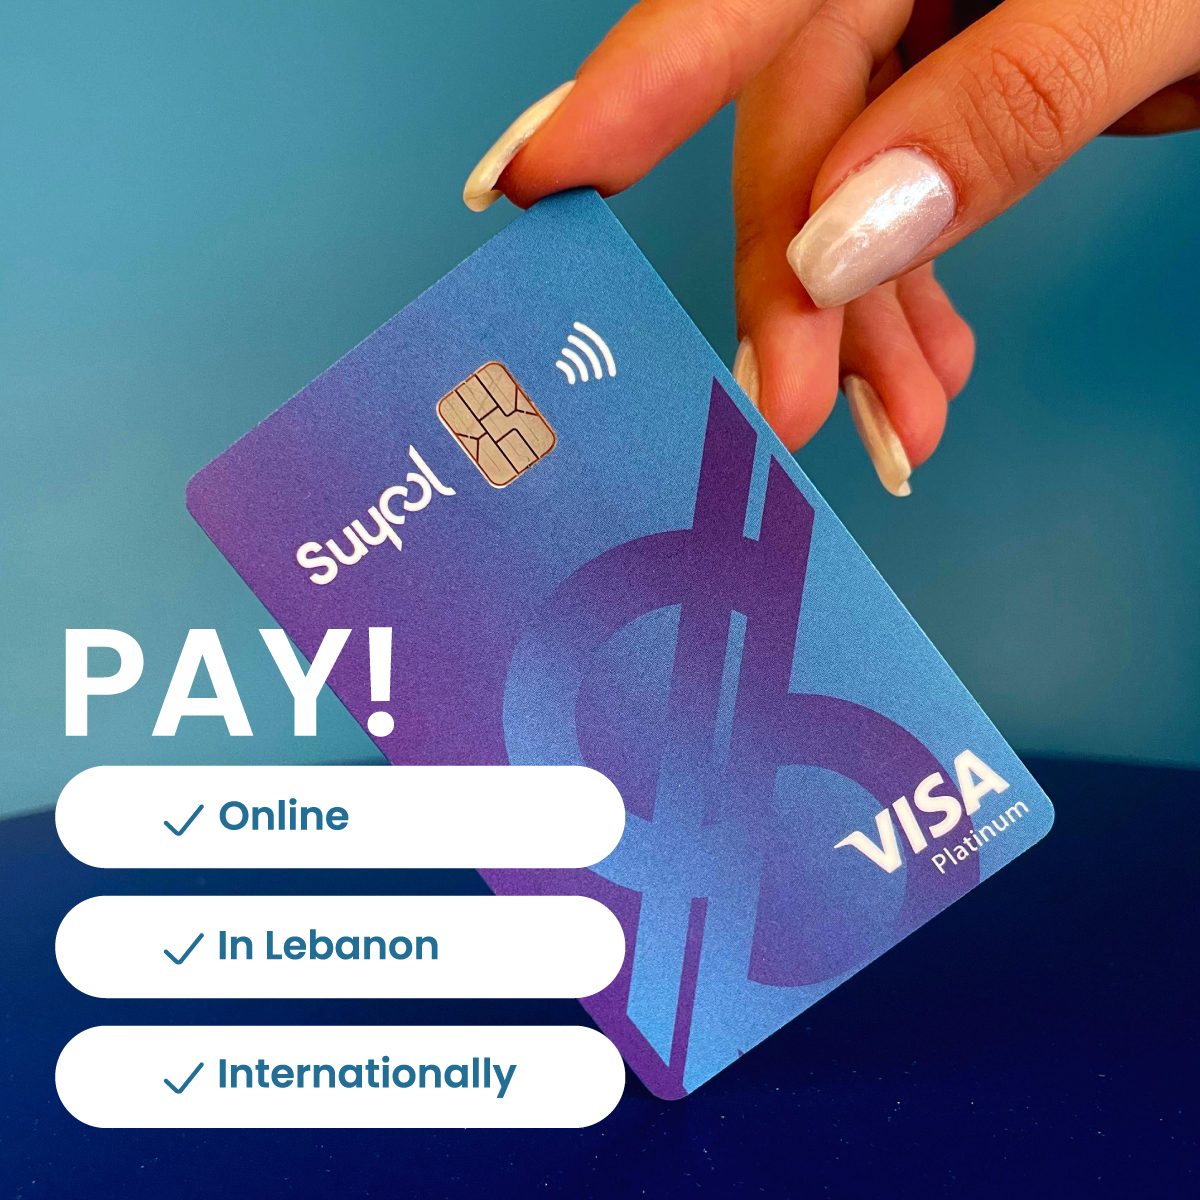 Get ready to pay like a pro with the Suyool Visa Platinum card! 🌐
Shop online, in Lebanon, and worldwide without any worries!🙌🏼

#Suyool #SuyoolApp #OnlineShop #Lebanon #لبنان #PayOnline #Visa #E_Wallet #SuyoolRevolution #SuyoolEverywhere #card